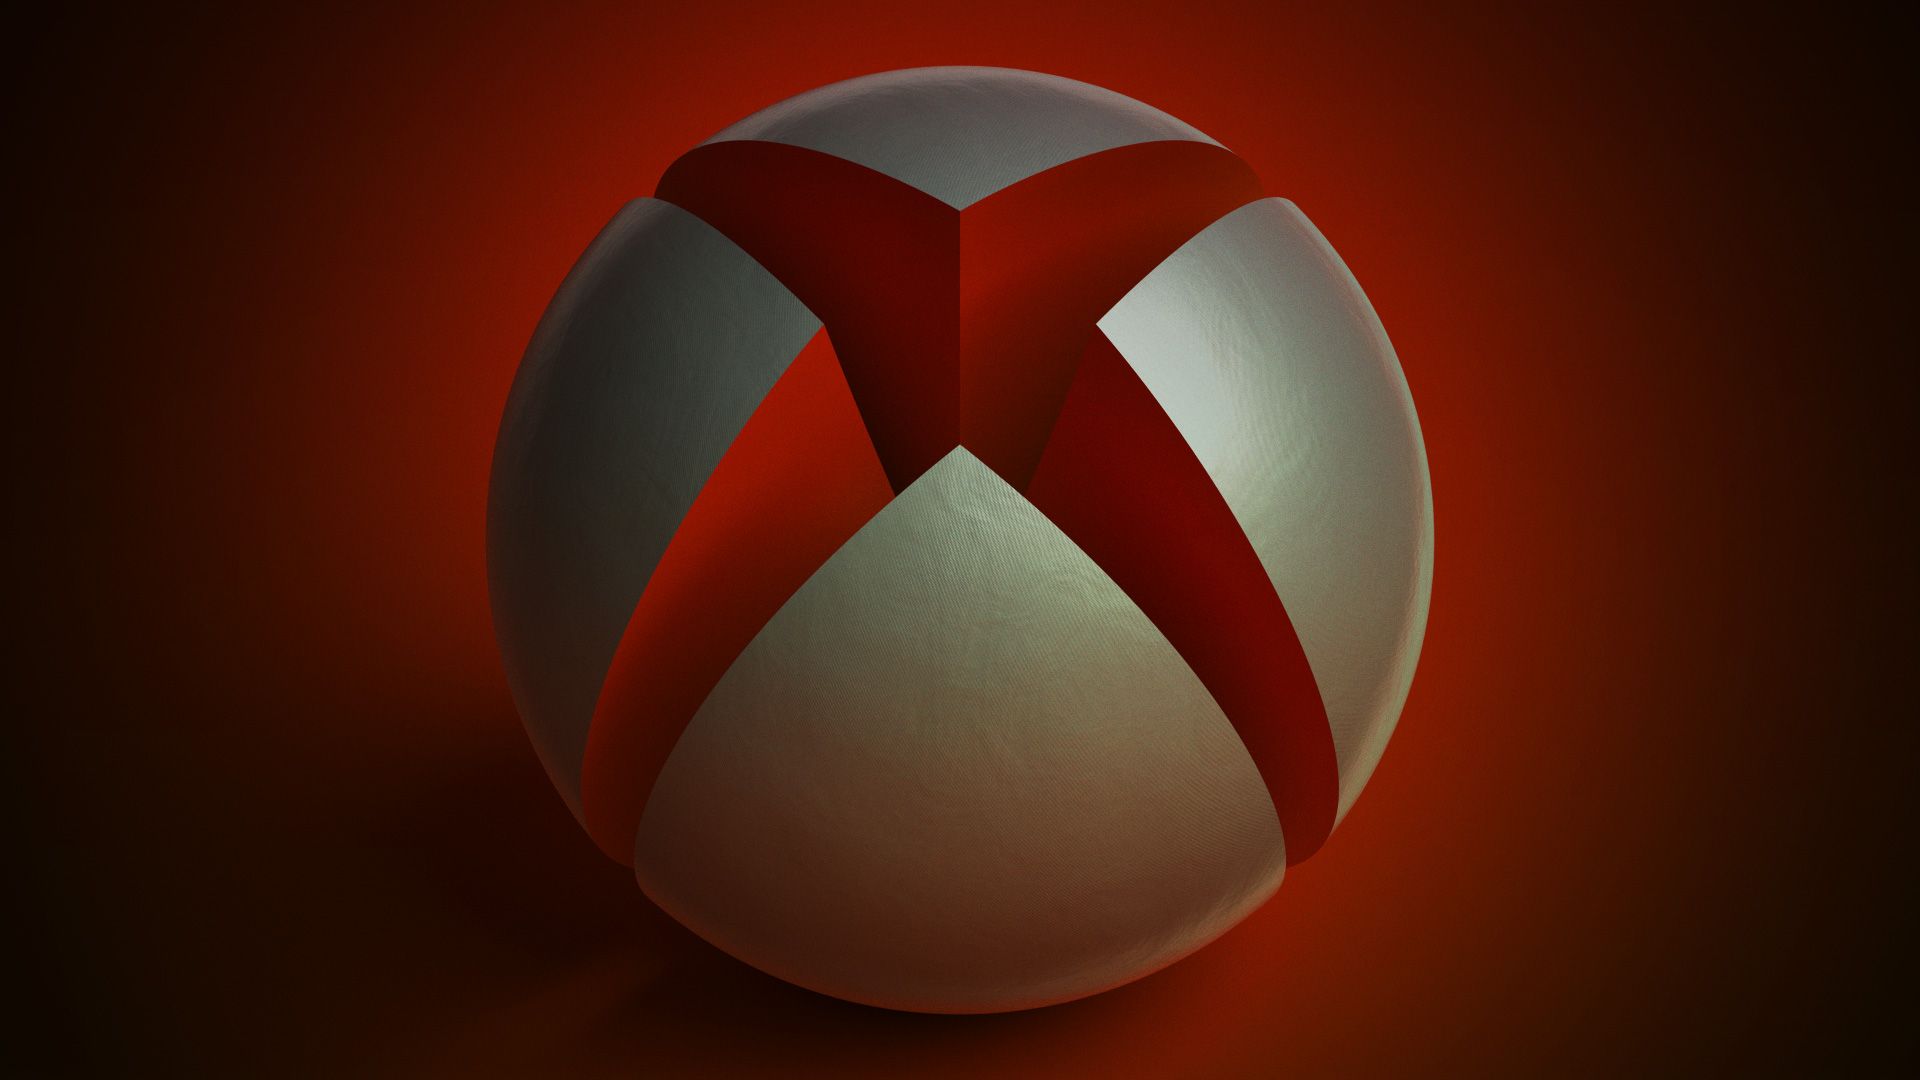 Red Xbox Wallpapers